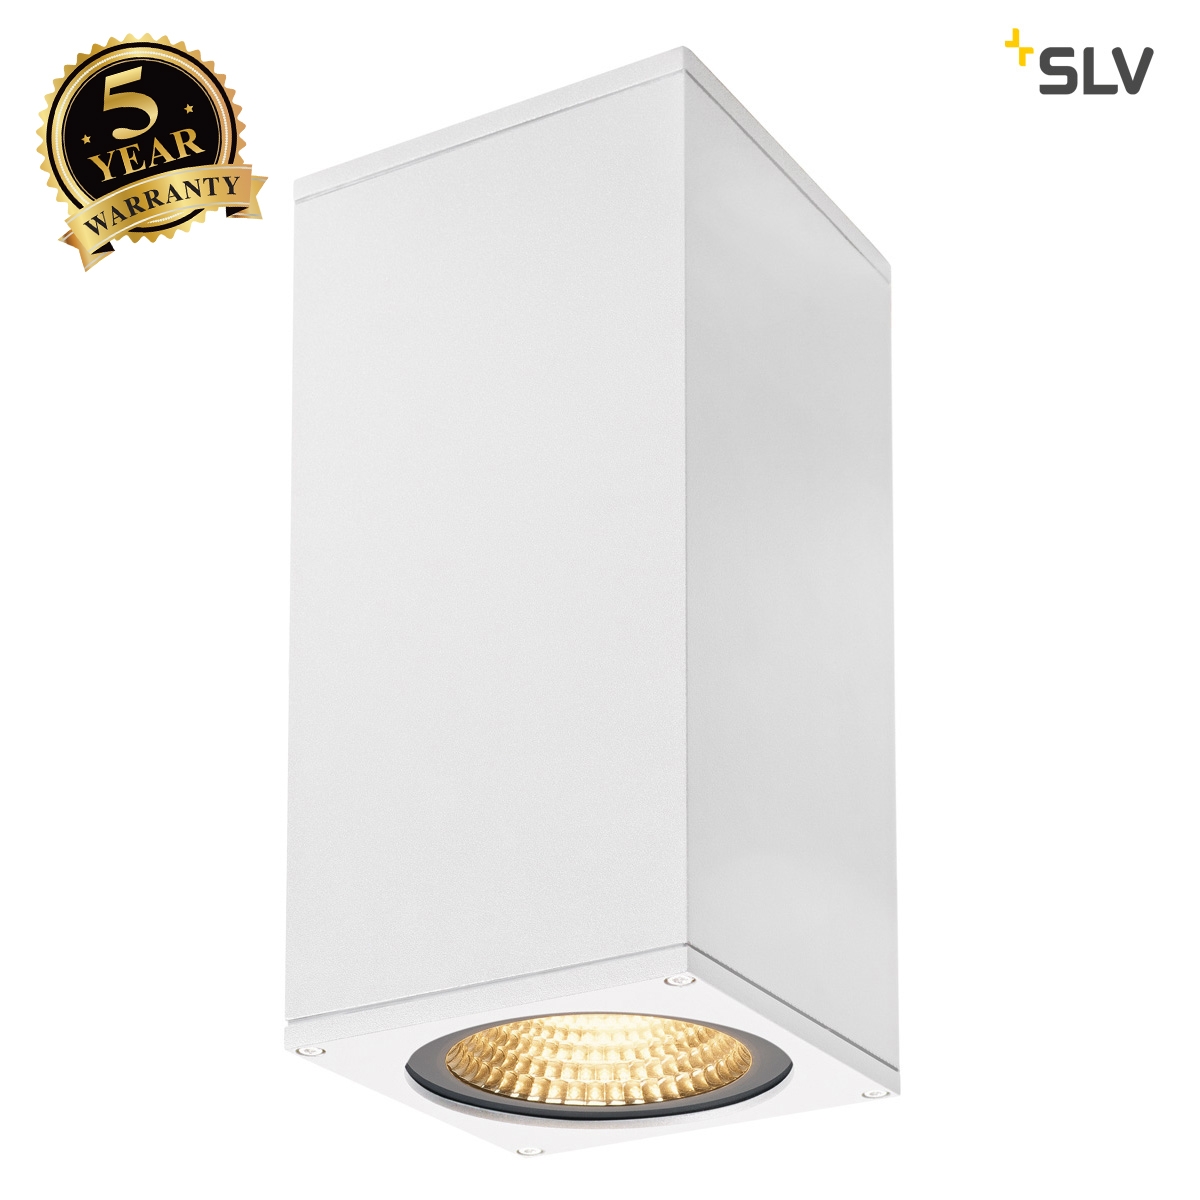 SLV BIG THEO WALL, outdoor wall light, double-headed, LED, 3000K, flood up/down, white, W/H/D 13/27.5/13.5 cm 234501